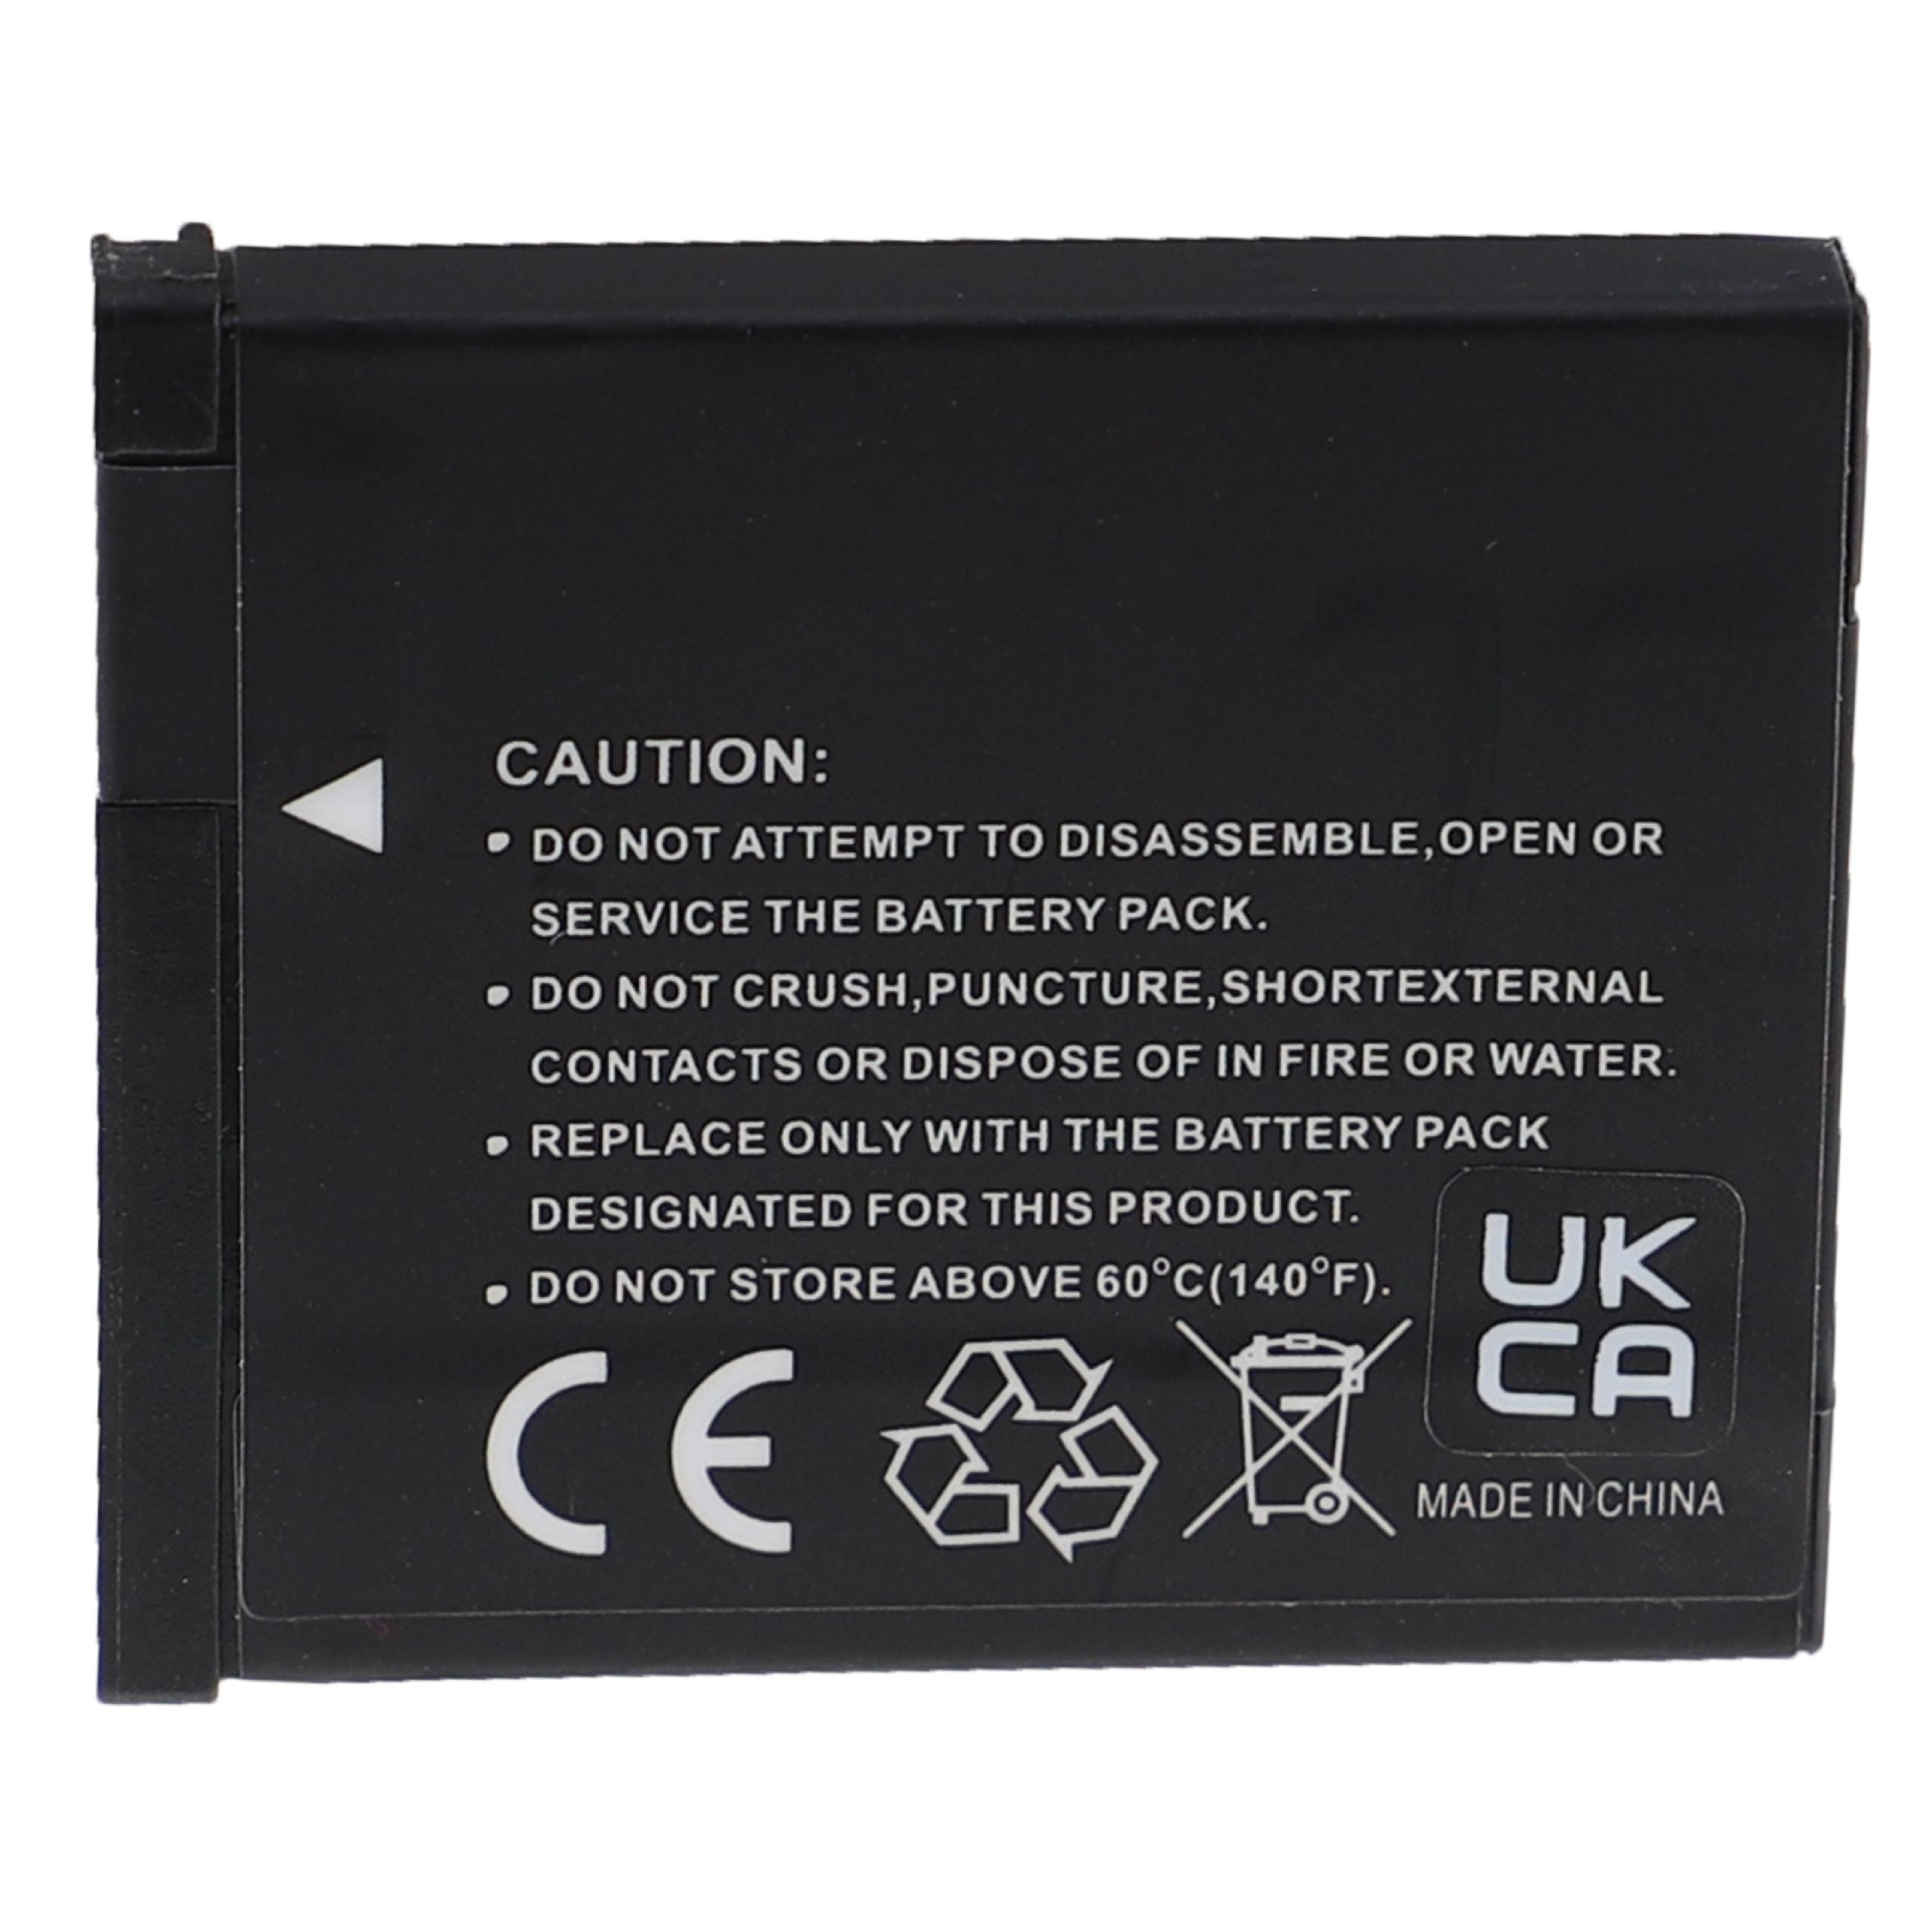 Battery Replacement for Canon NB-8L - 700mAh, 3.7V, Li-Ion